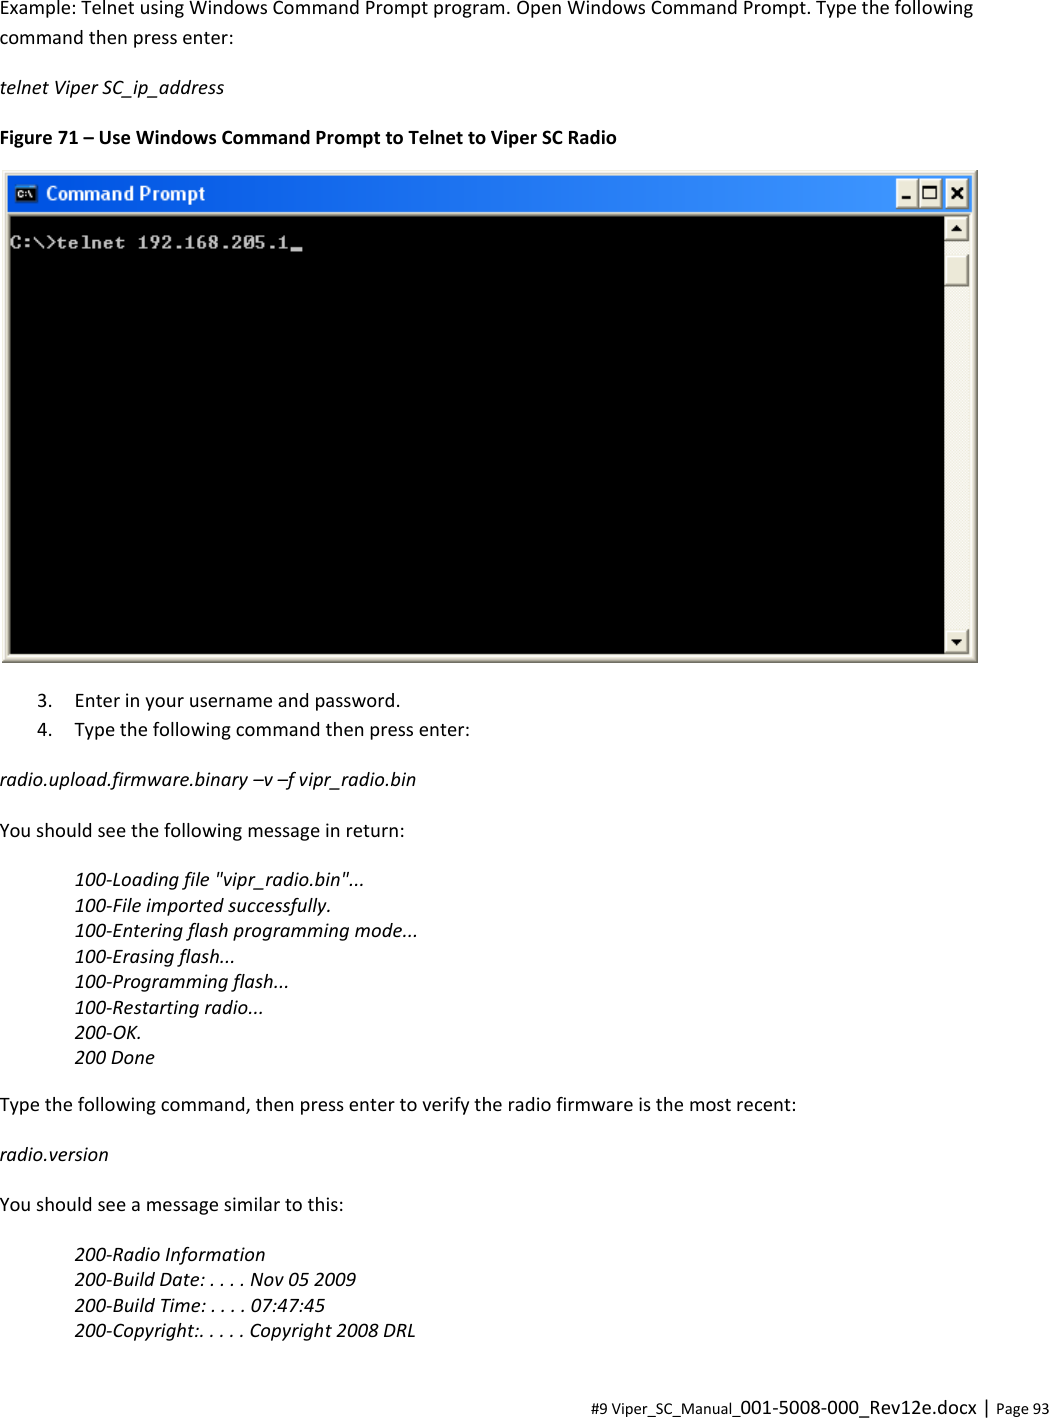  #9 Viper_SC_Manual_001-5008-000_Rev12e.docx | Page 93 Example: Telnet using Windows Command Prompt program. Open Windows Command Prompt. Type the following command then press enter: telnet Viper SC_ip_address Figure 71 – Use Windows Command Prompt to Telnet to Viper SC Radio  3. Enter in your username and password. 4. Type the following command then press enter: radio.upload.firmware.binary –v –f vipr_radio.bin You should see the following message in return: 100-Loading file &quot;vipr_radio.bin&quot;... 100-File imported successfully. 100-Entering flash programming mode... 100-Erasing flash... 100-Programming flash... 100-Restarting radio... 200-OK. 200 Done Type the following command, then press enter to verify the radio firmware is the most recent: radio.version You should see a message similar to this: 200-Radio Information 200-Build Date: . . . . Nov 05 2009 200-Build Time: . . . . 07:47:45 200-Copyright:. . . . . Copyright 2008 DRL 